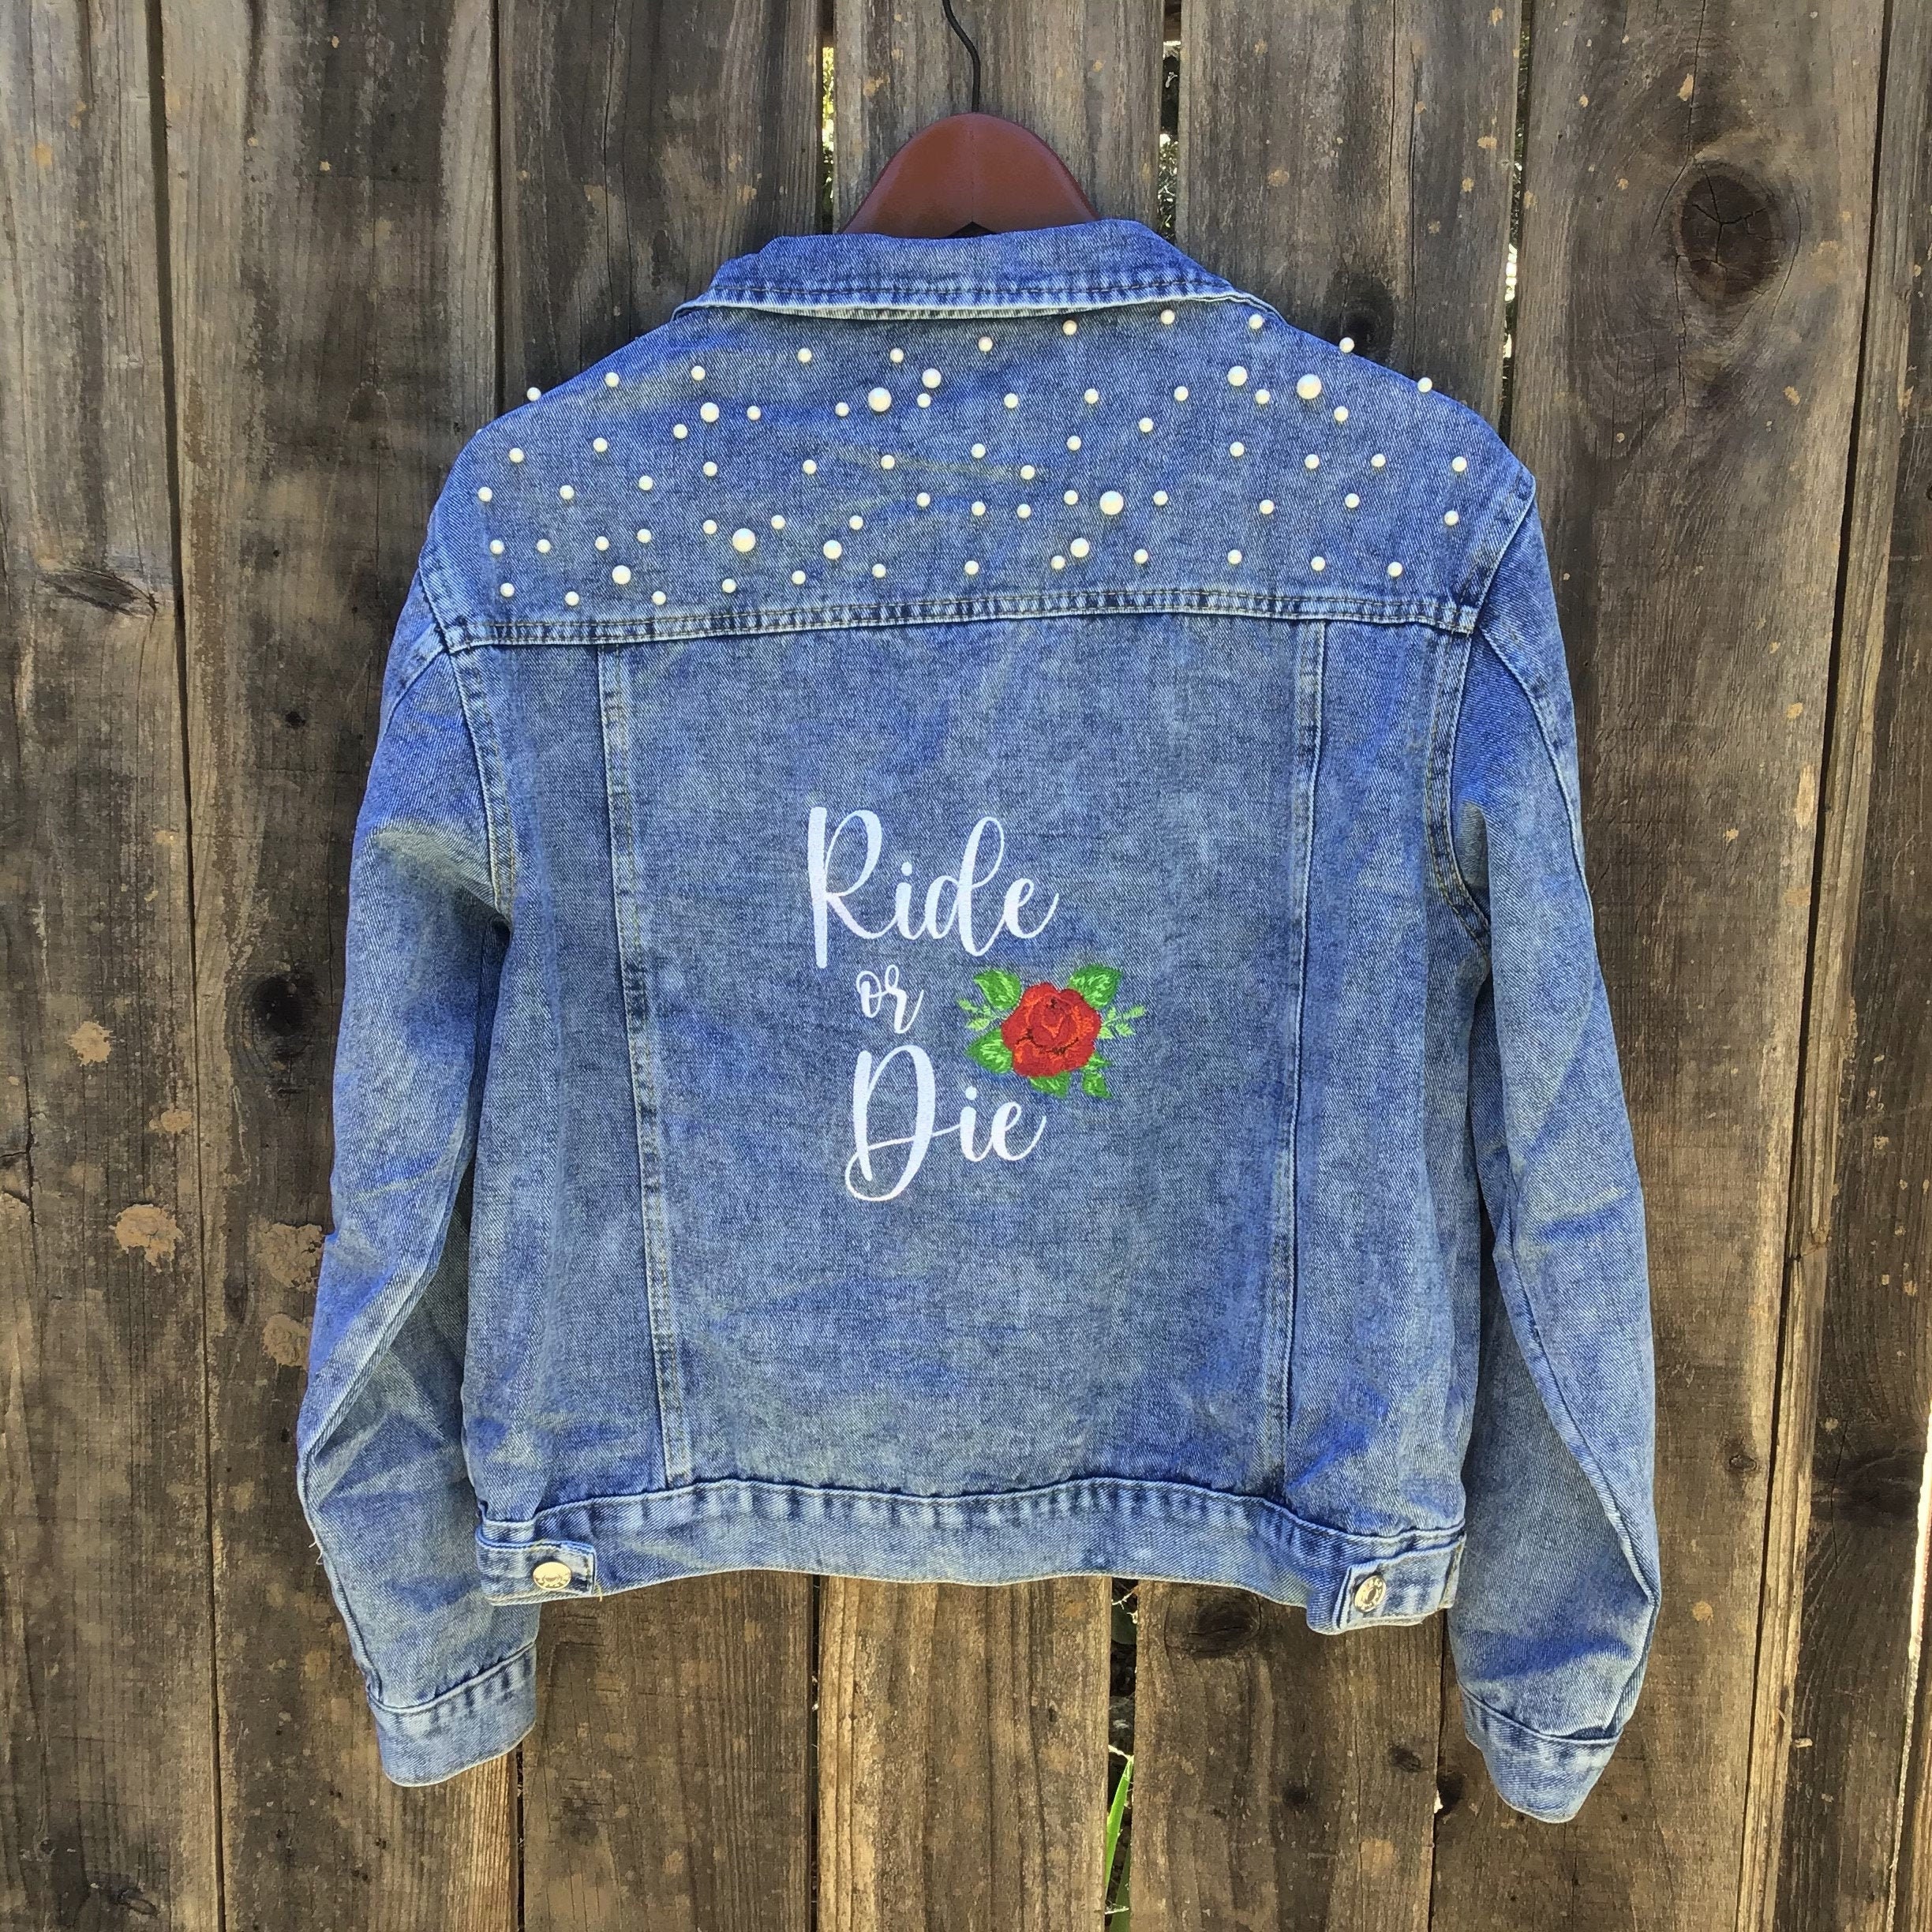 Spring upcycle: How to make an applique jean jacket - Elizabeth